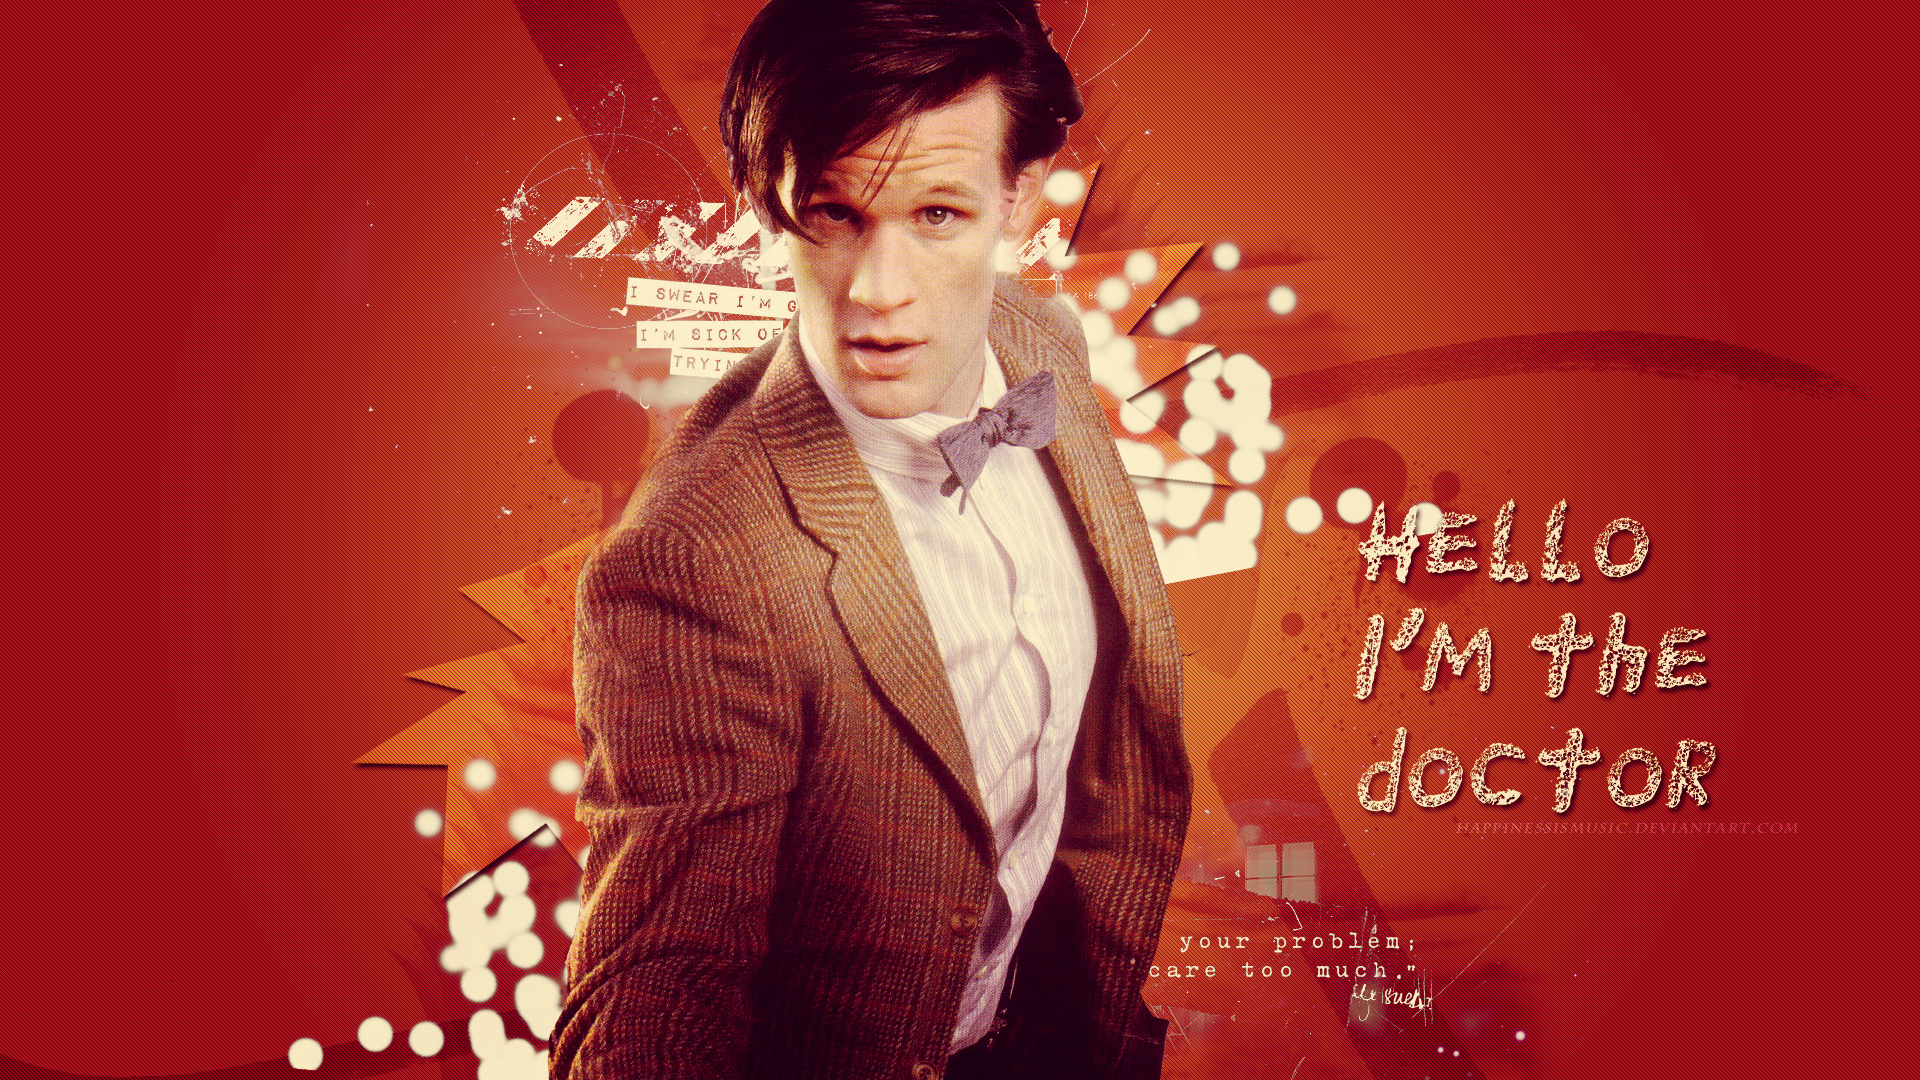 The Eleventh Doctor Wallpaper By Happinessismusic On